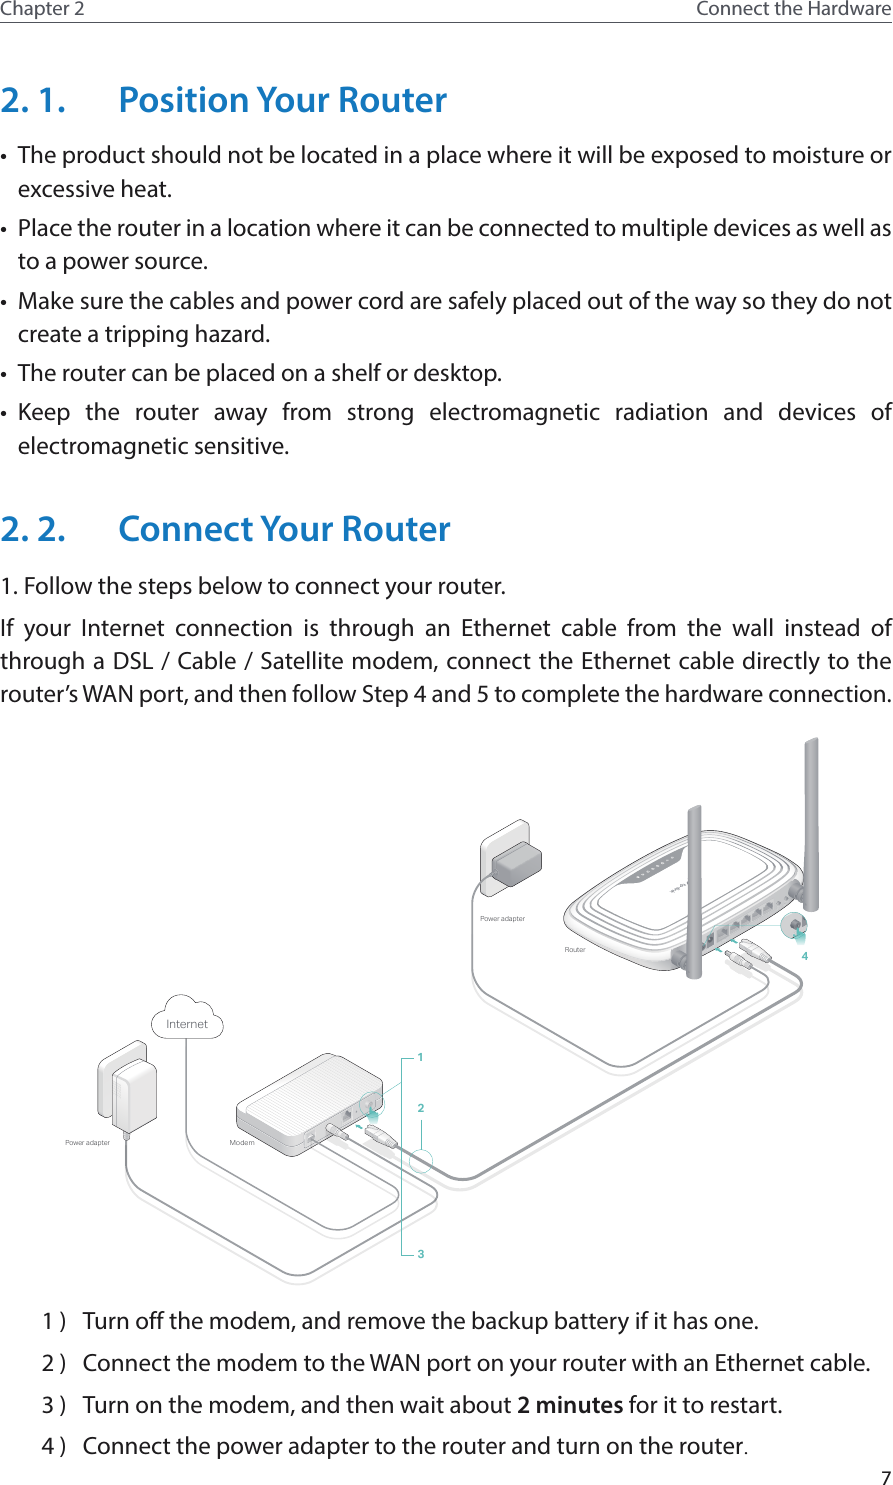 7Chapter 2 Connect the Hardware2. 1.  Position Your Router•  The product should not be located in a place where it will be exposed to moisture or excessive heat.•  Place the router in a location where it can be connected to multiple devices as well as to a power source.•  Make sure the cables and power cord are safely placed out of the way so they do not create a tripping hazard.•  The router can be placed on a shelf or desktop.•  Keep the router away from strong electromagnetic radiation and devices of electromagnetic sensitive.2. 2.  Connect Your Router1. Follow the steps below to connect your router.If your Internet connection is through an Ethernet cable from the wall instead of through a DSL / Cable / Satellite modem, connect the Ethernet cable directly to the router’s WAN port, and then follow Step 4 and 5 to complete the hardware connection.POWERON/OFF WAN 1 2 3 4WPS/RESETWIFION/OFFPOWERON/OFF WAN 1 2 3 4WPS/RESETWIFION/OFFPOWERON/OFF POWERON/OFFModemPower adapterRouterPower adapter1324Internet1 )  Turn off the modem, and remove the backup battery if it has one.2 )  Connect the modem to the WAN port on your router with an Ethernet cable.3 )  Turn on the modem, and then wait about 2 minutes for it to restart.4 )  Connect the power adapter to the router and turn on the router.